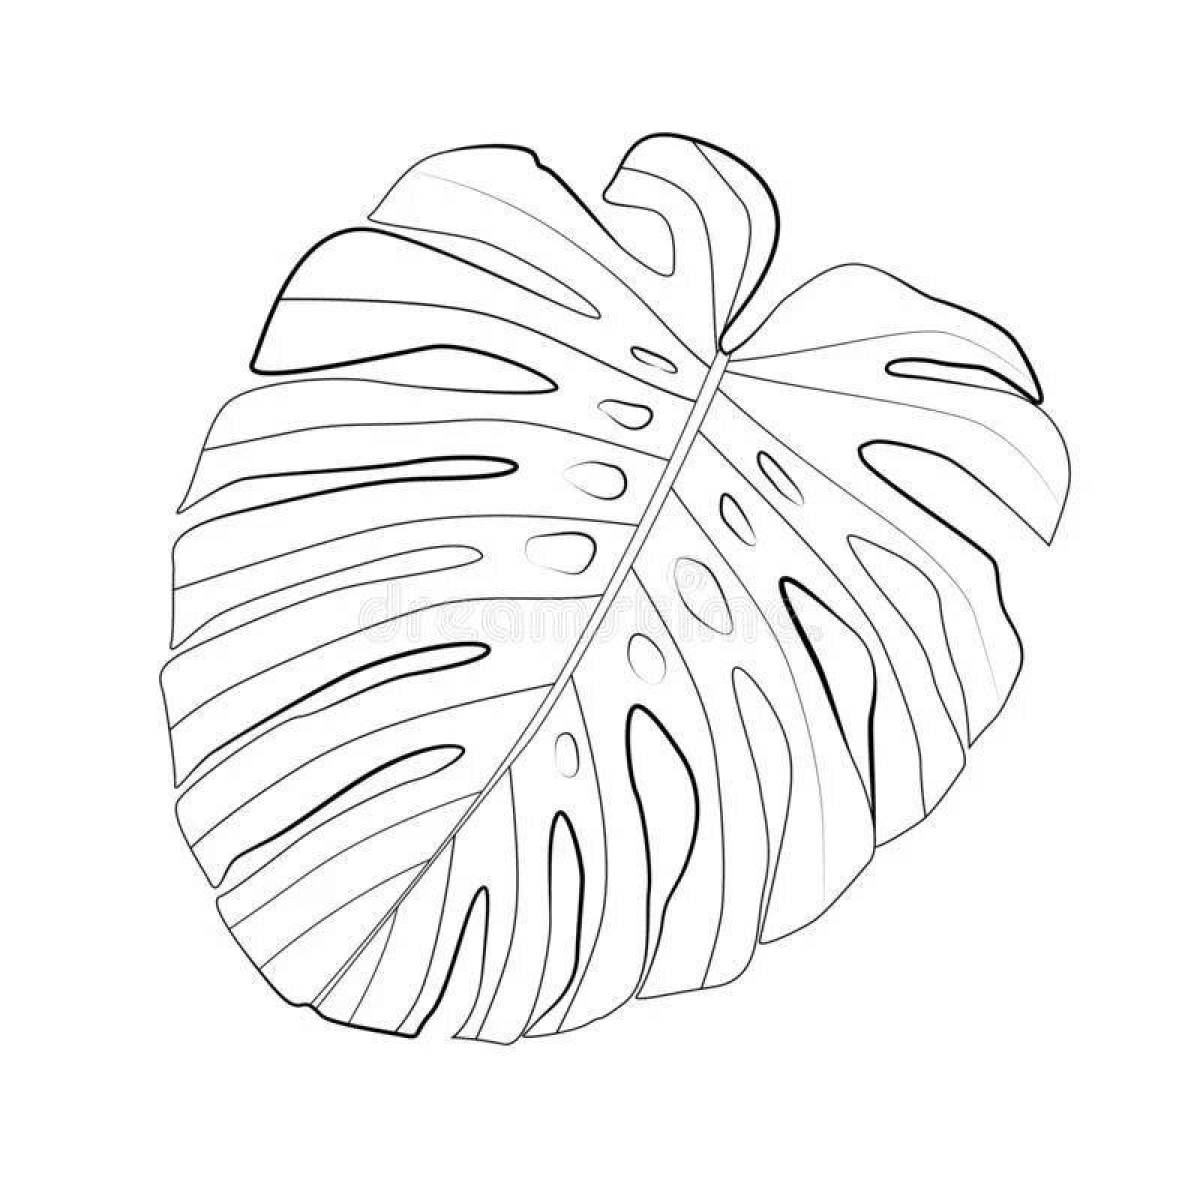 Coloring monstera cheerful leaf